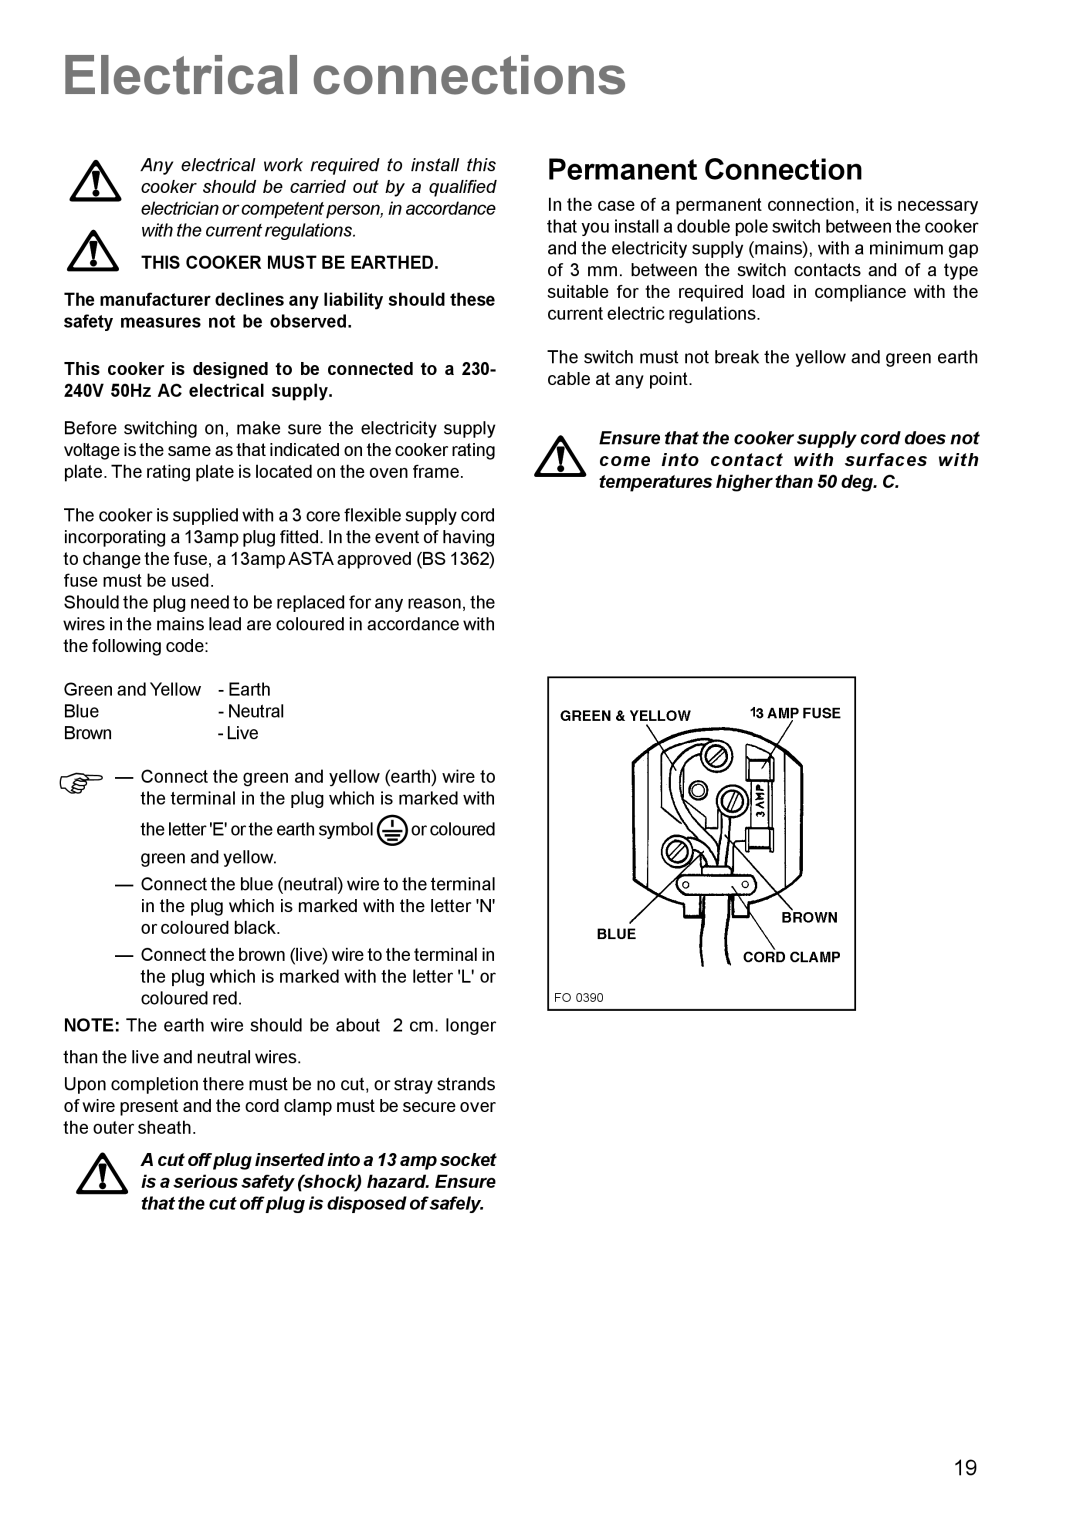 Electrolux SIG 224 G manual Electrical connections, Permanent Connection 